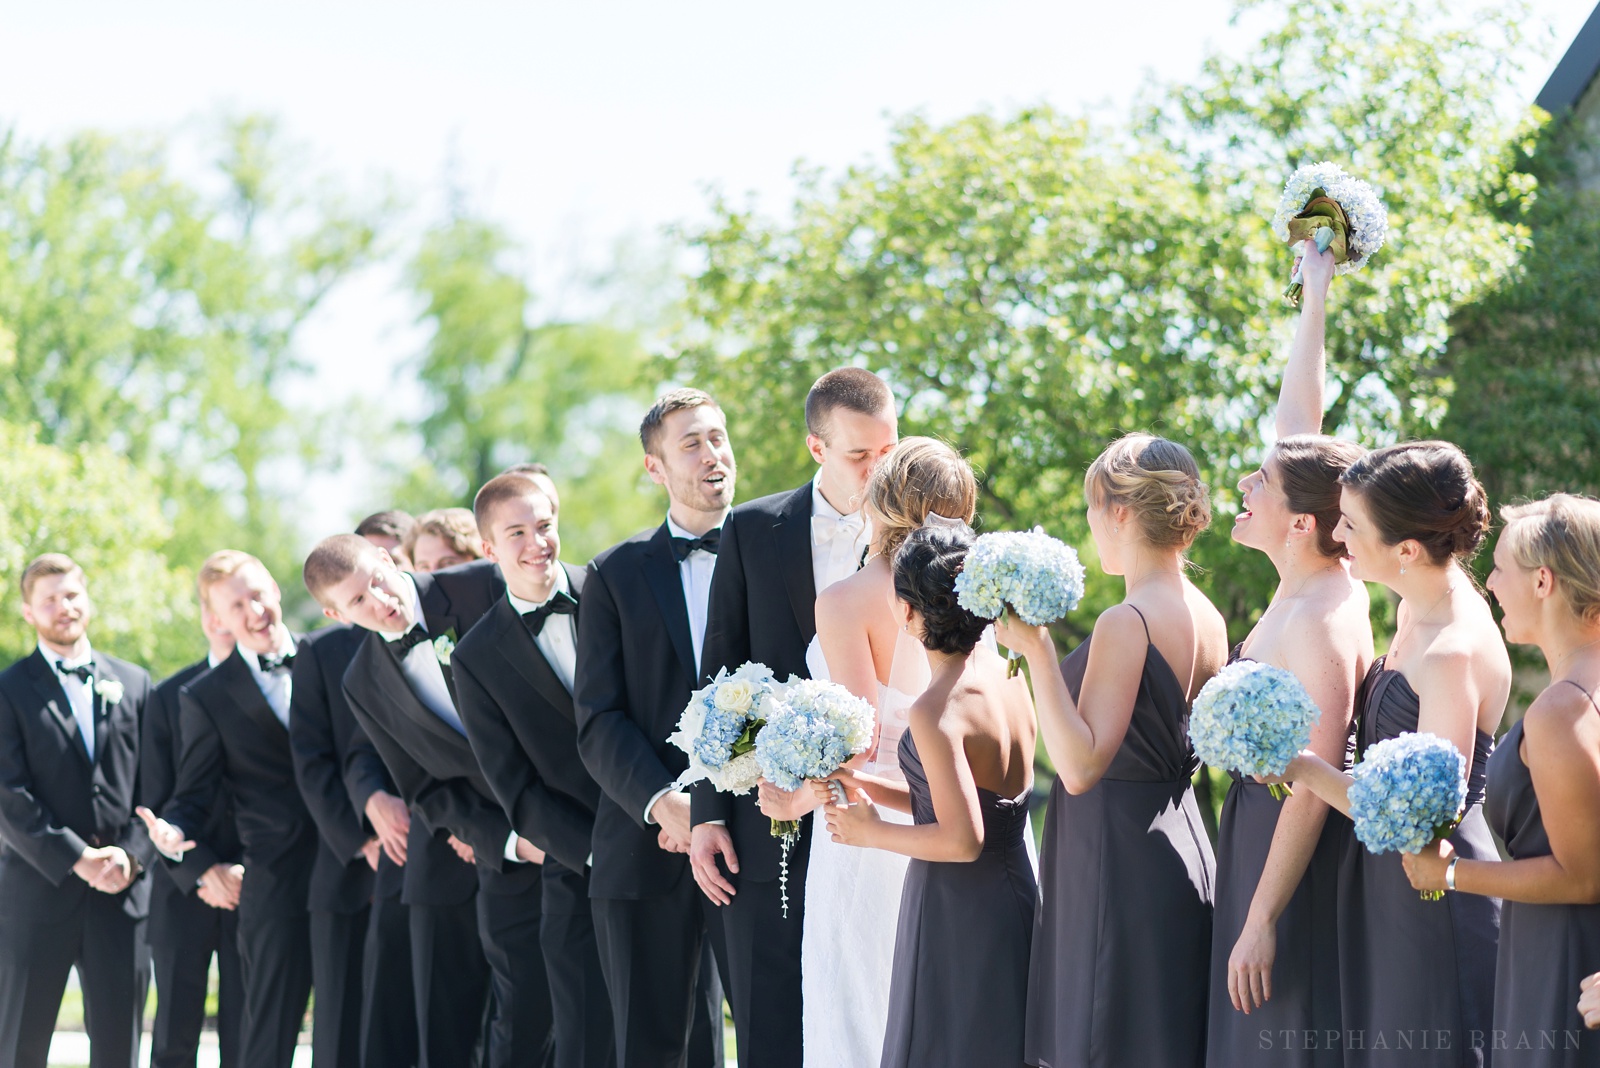 fun-bridal-party-group-photo-with-couple-kissing